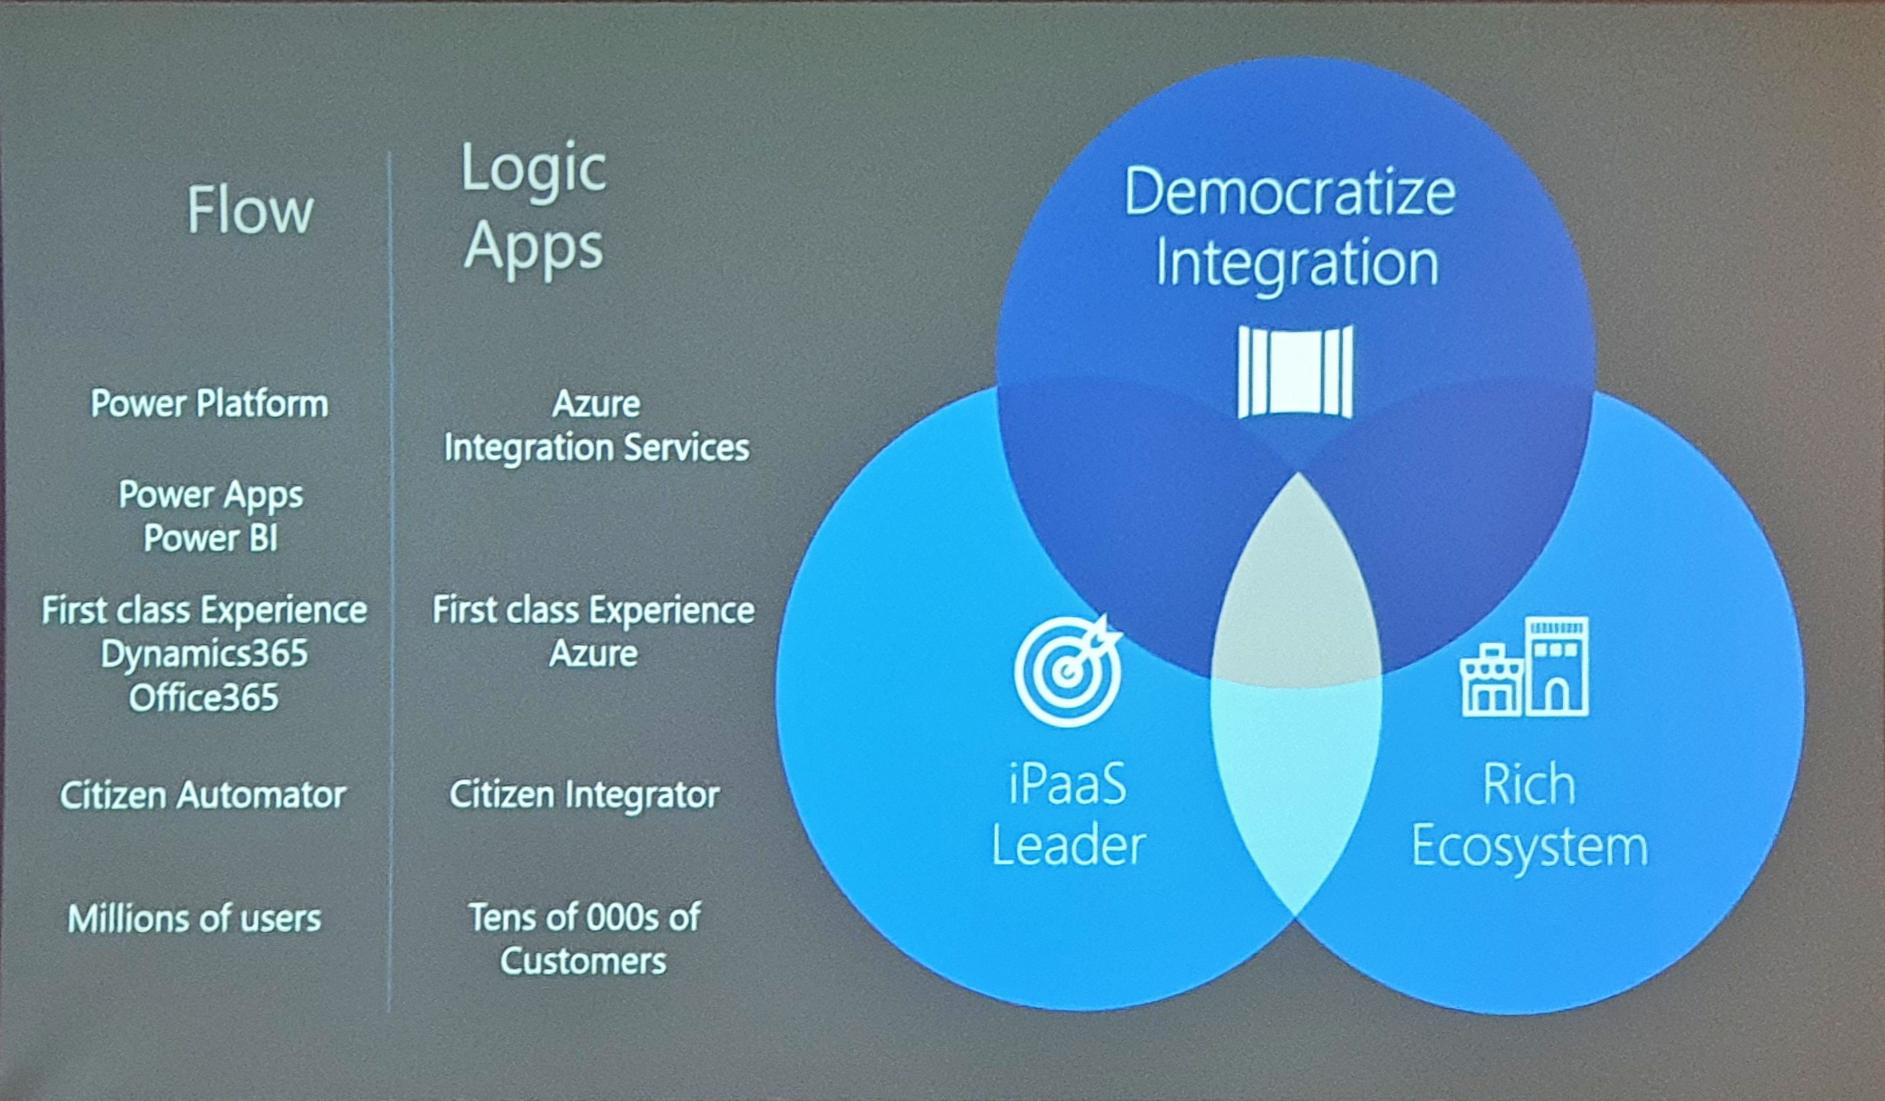 In terms of democratization – there are Logic Apps & Flow teams